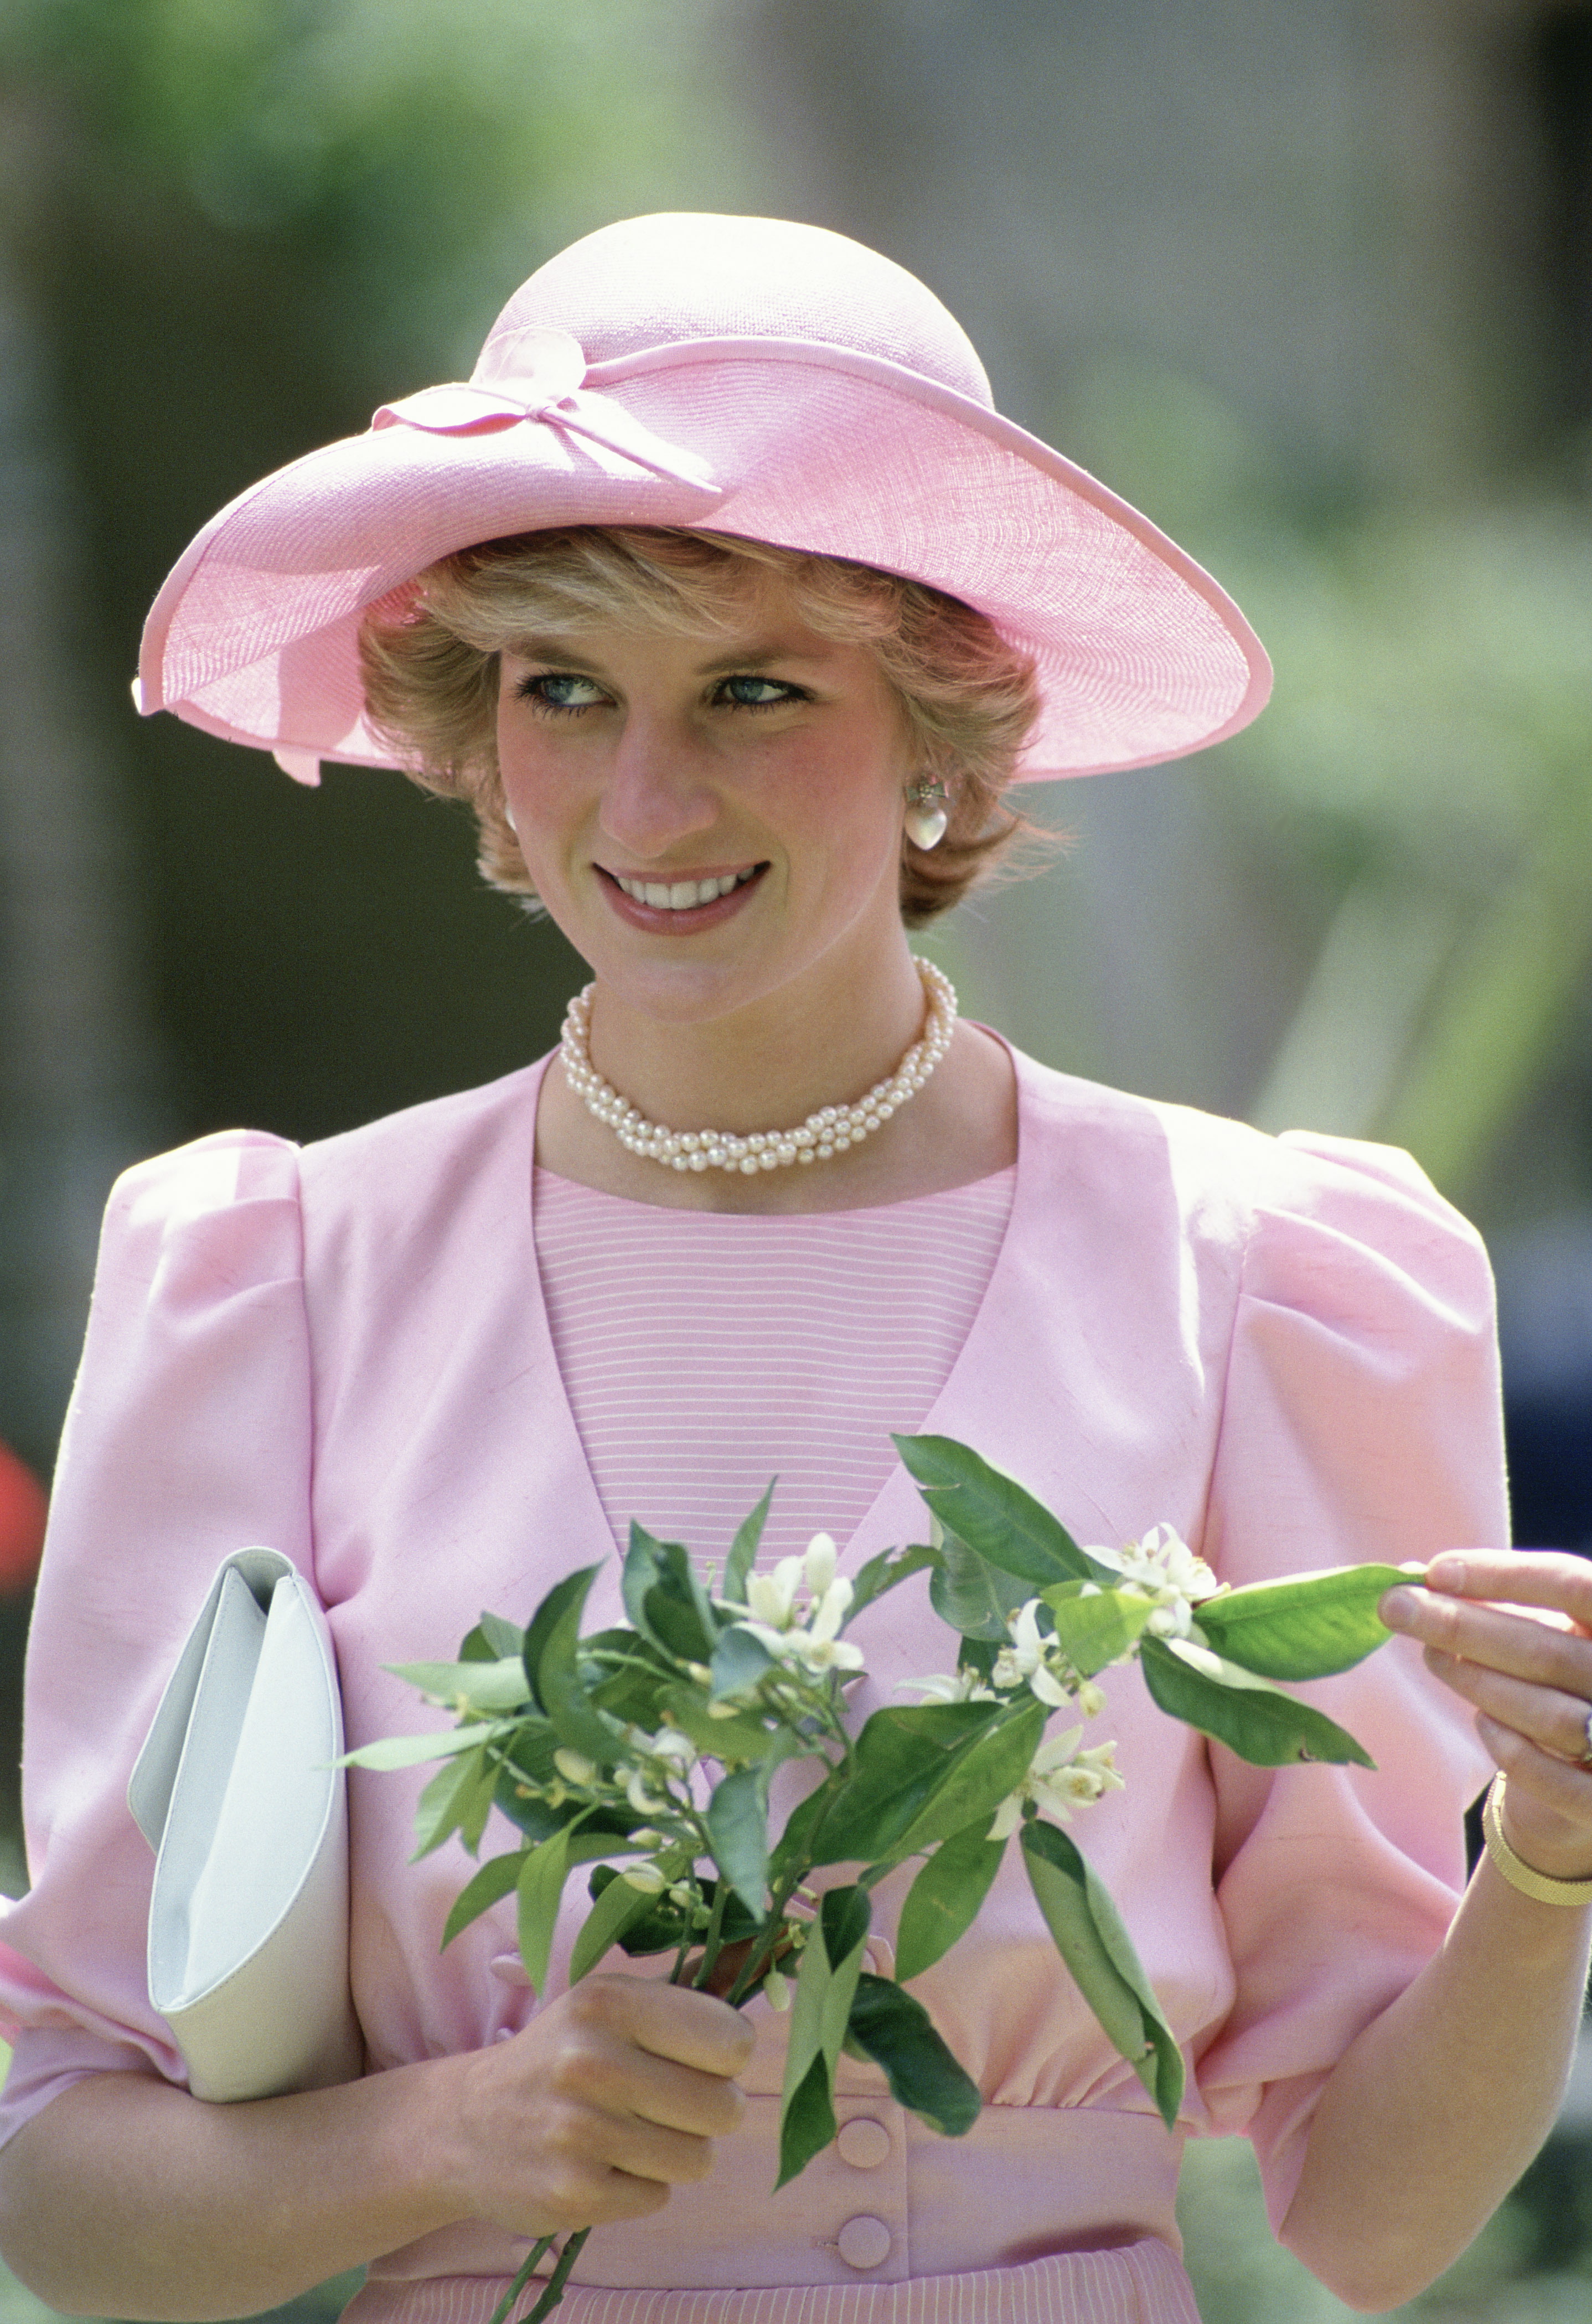 Diana, Princess of Wales on April 30, 1985 | Source: Getty Images